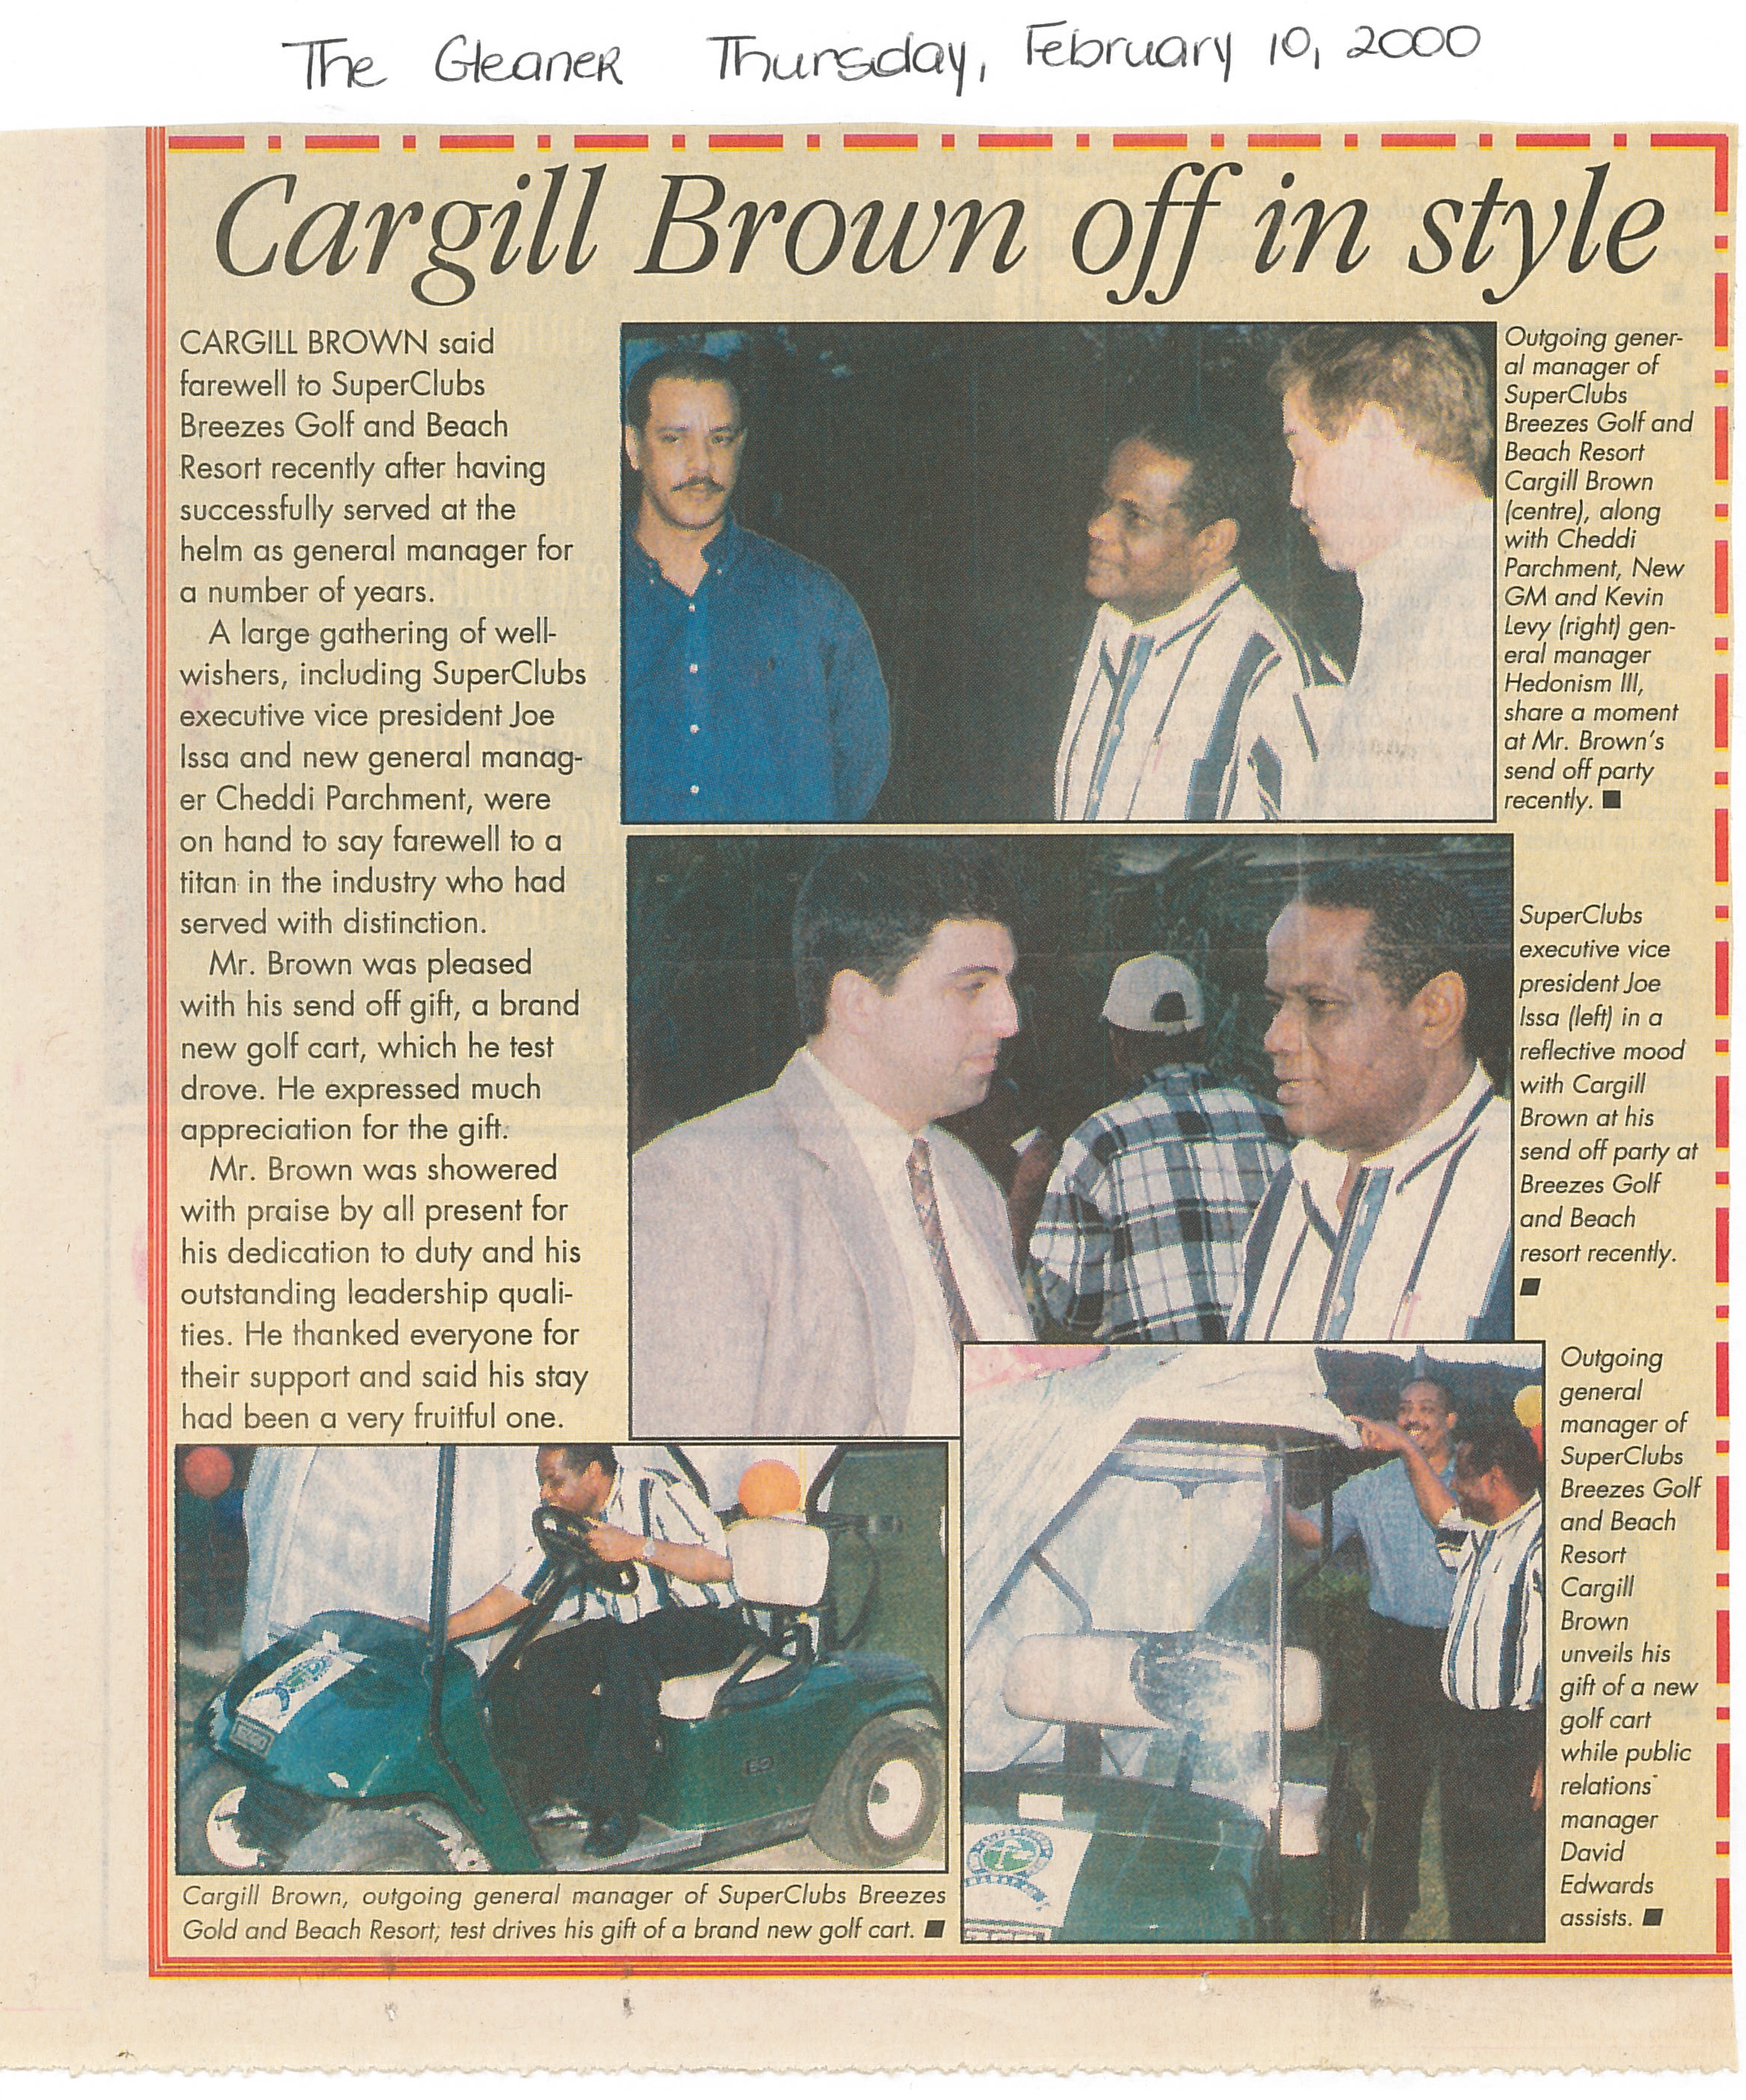 Cargill Brown off in style